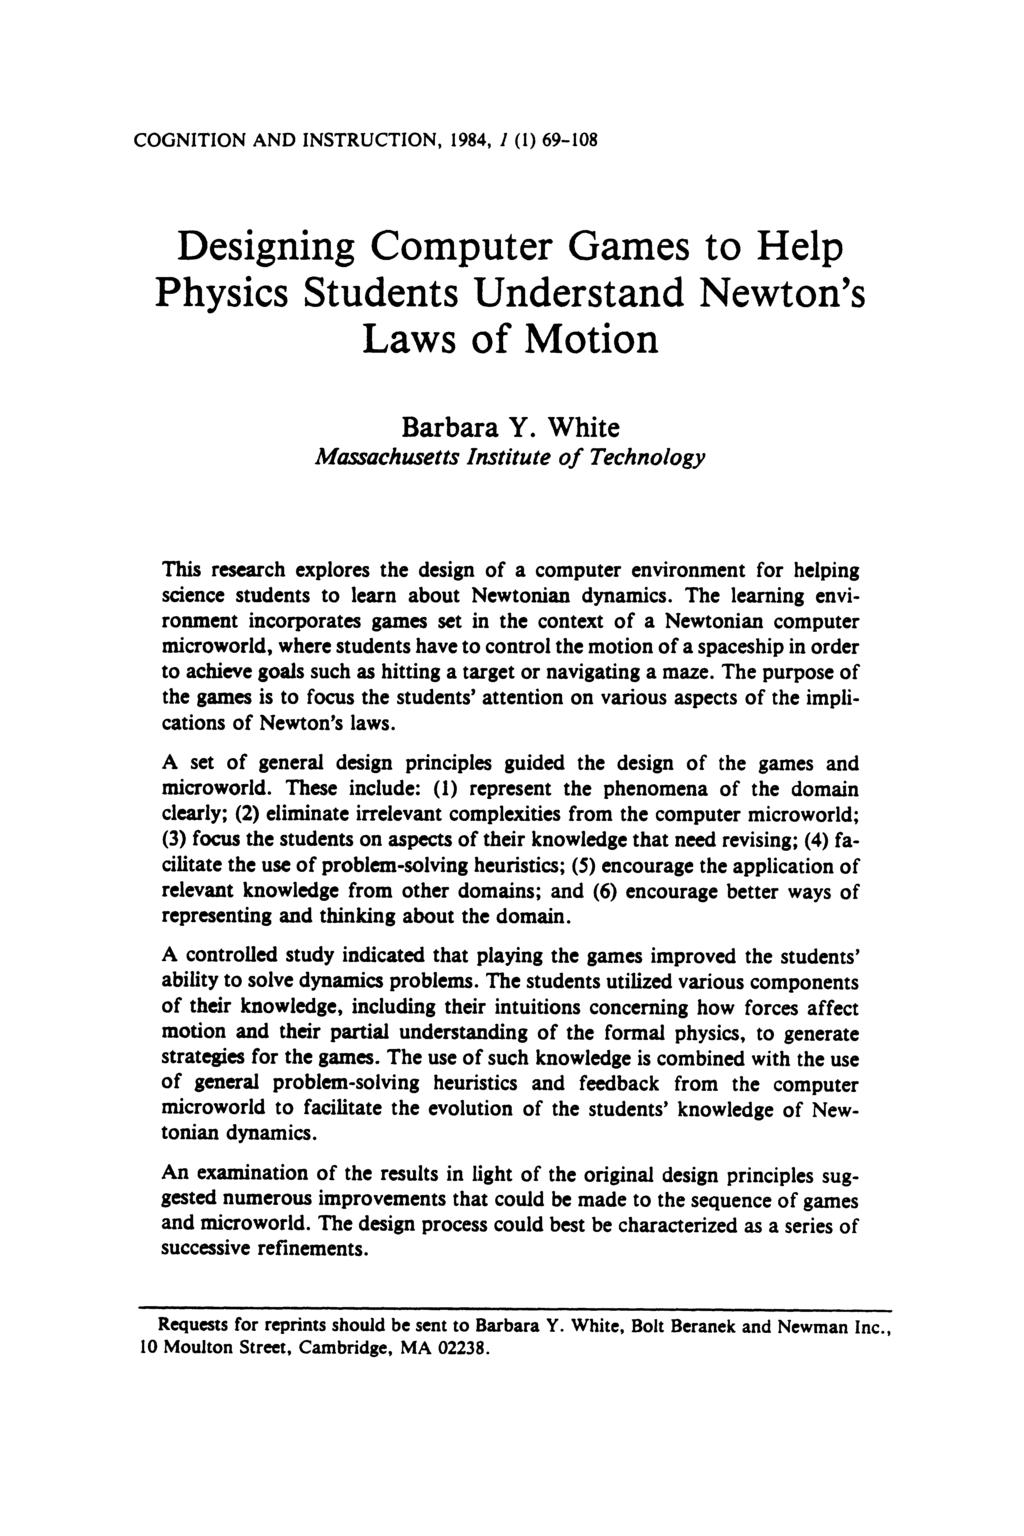 COGNITION AND INSTRUCTION, 1984, 1 (1) 69-108 Designing Computer Games to Help Physics Students Understand Newton's Laws of Motion Barbara Y.